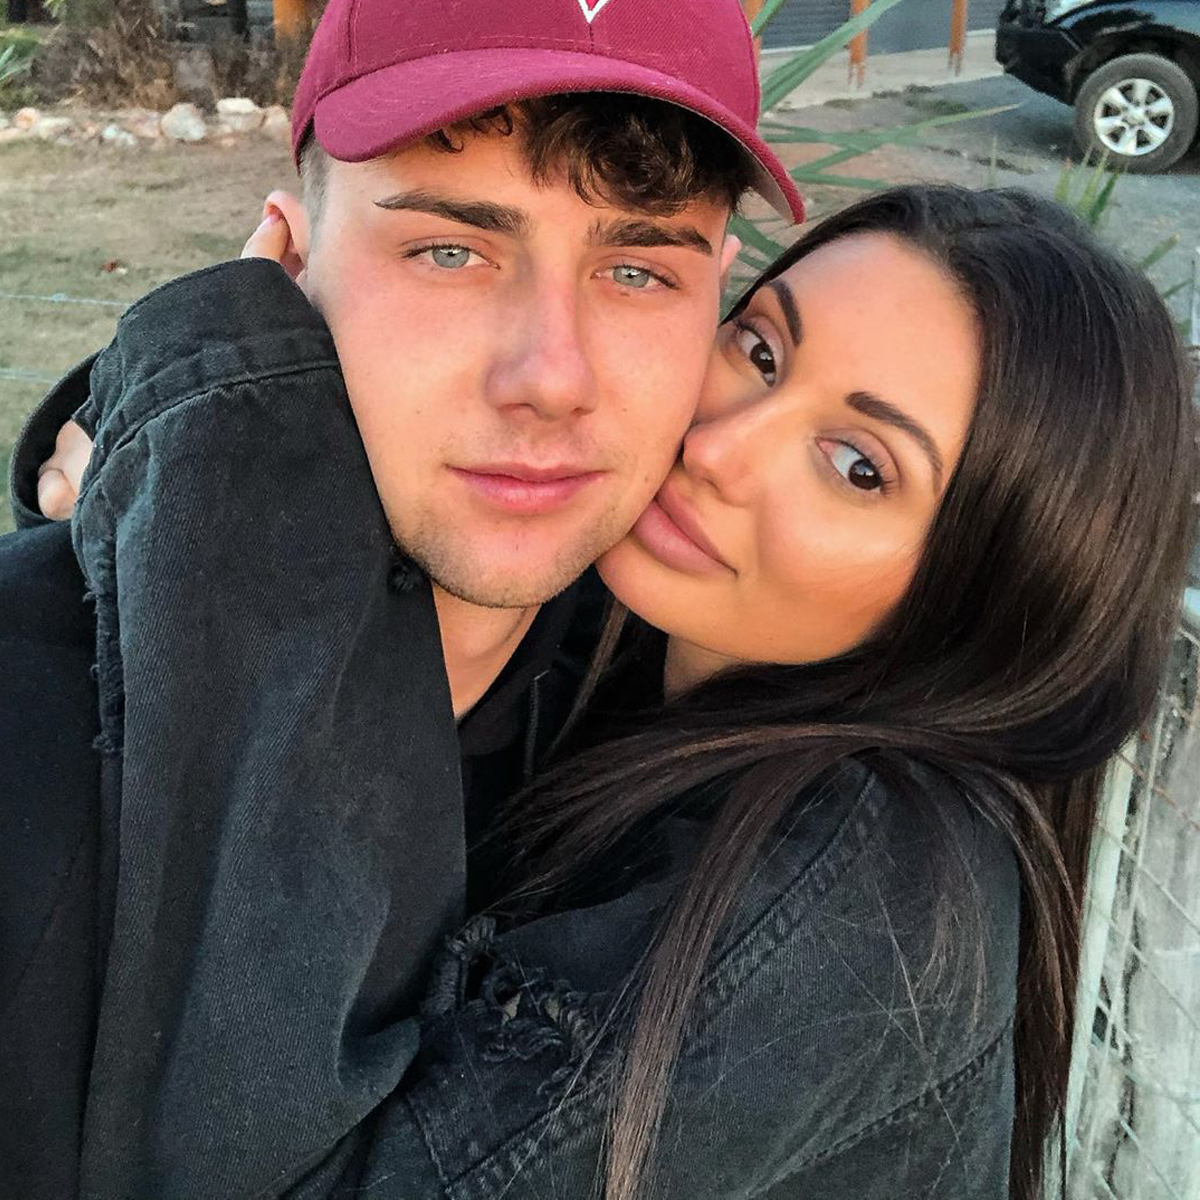 Too Hot to Handle's Francesca Farago and Harry Jowsey Break Up E